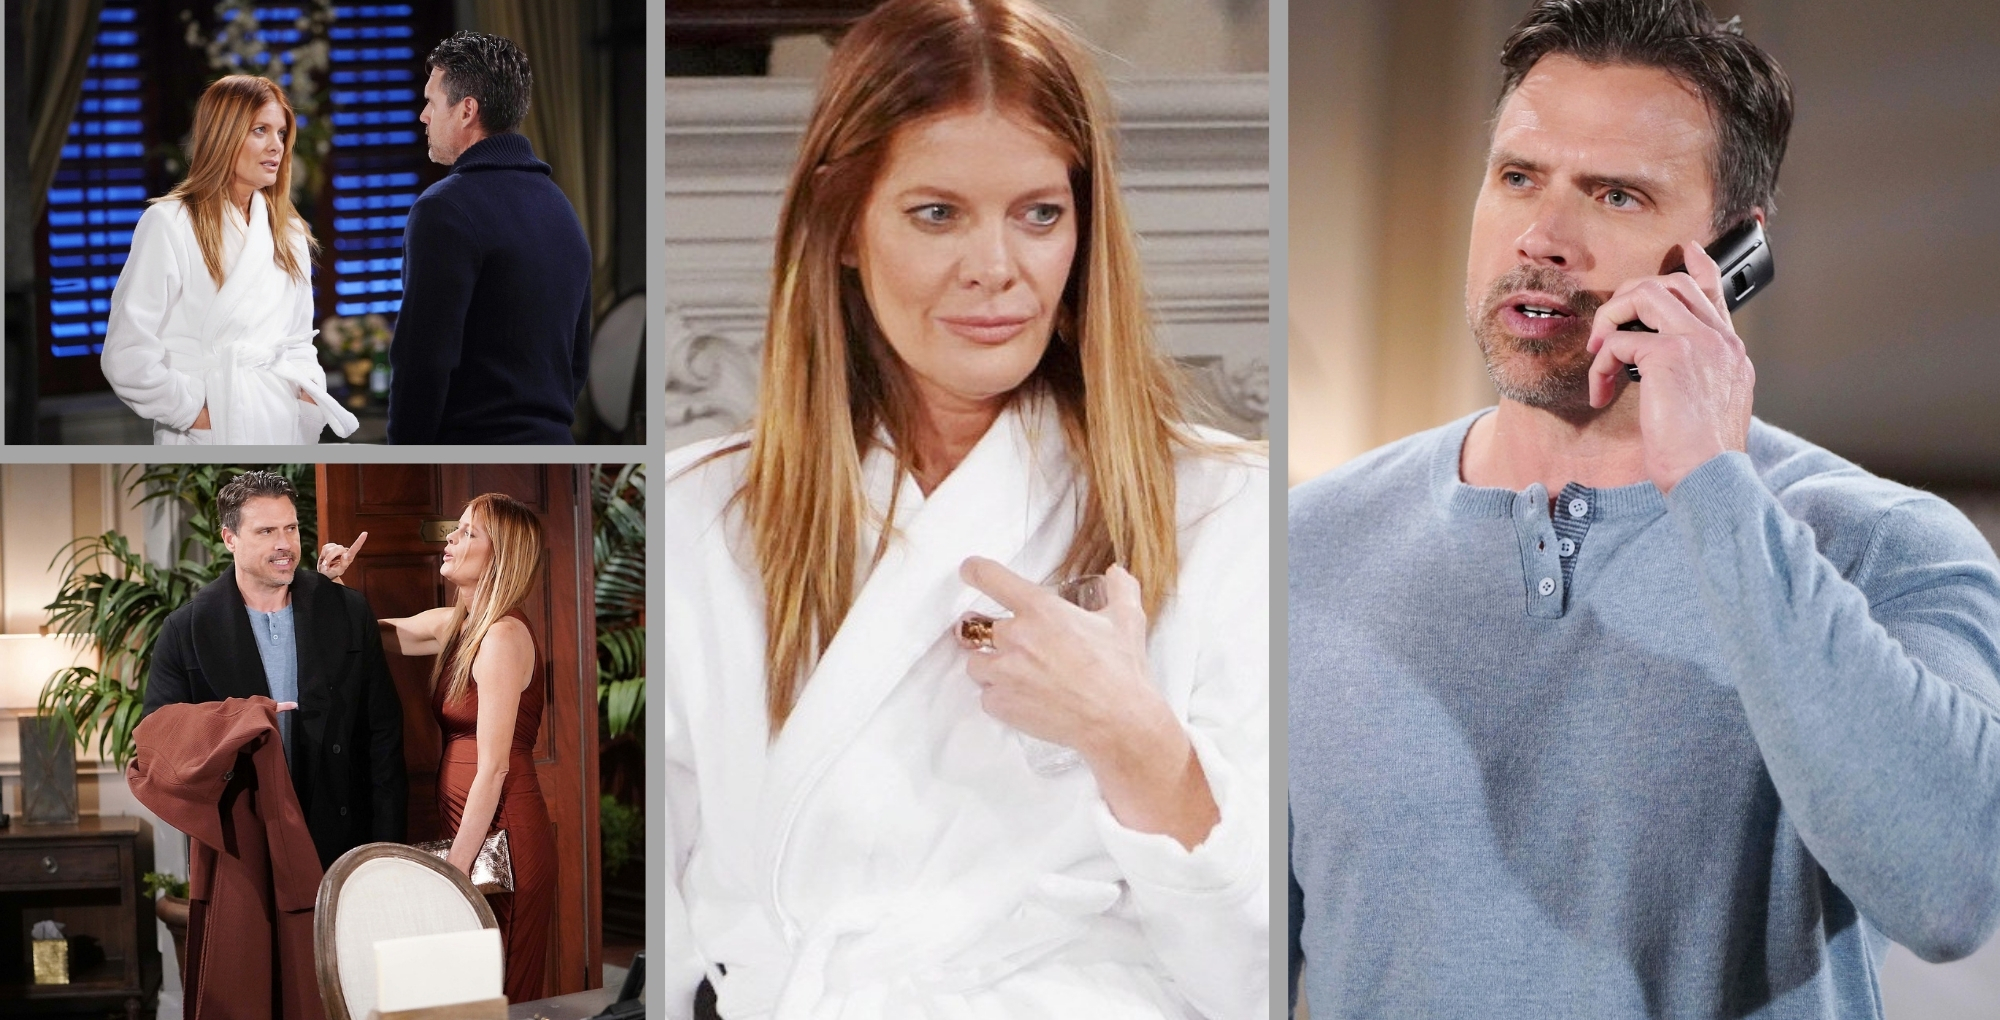 Y&R Preview Photos: Nick Comes To Phyllis’s Rescue